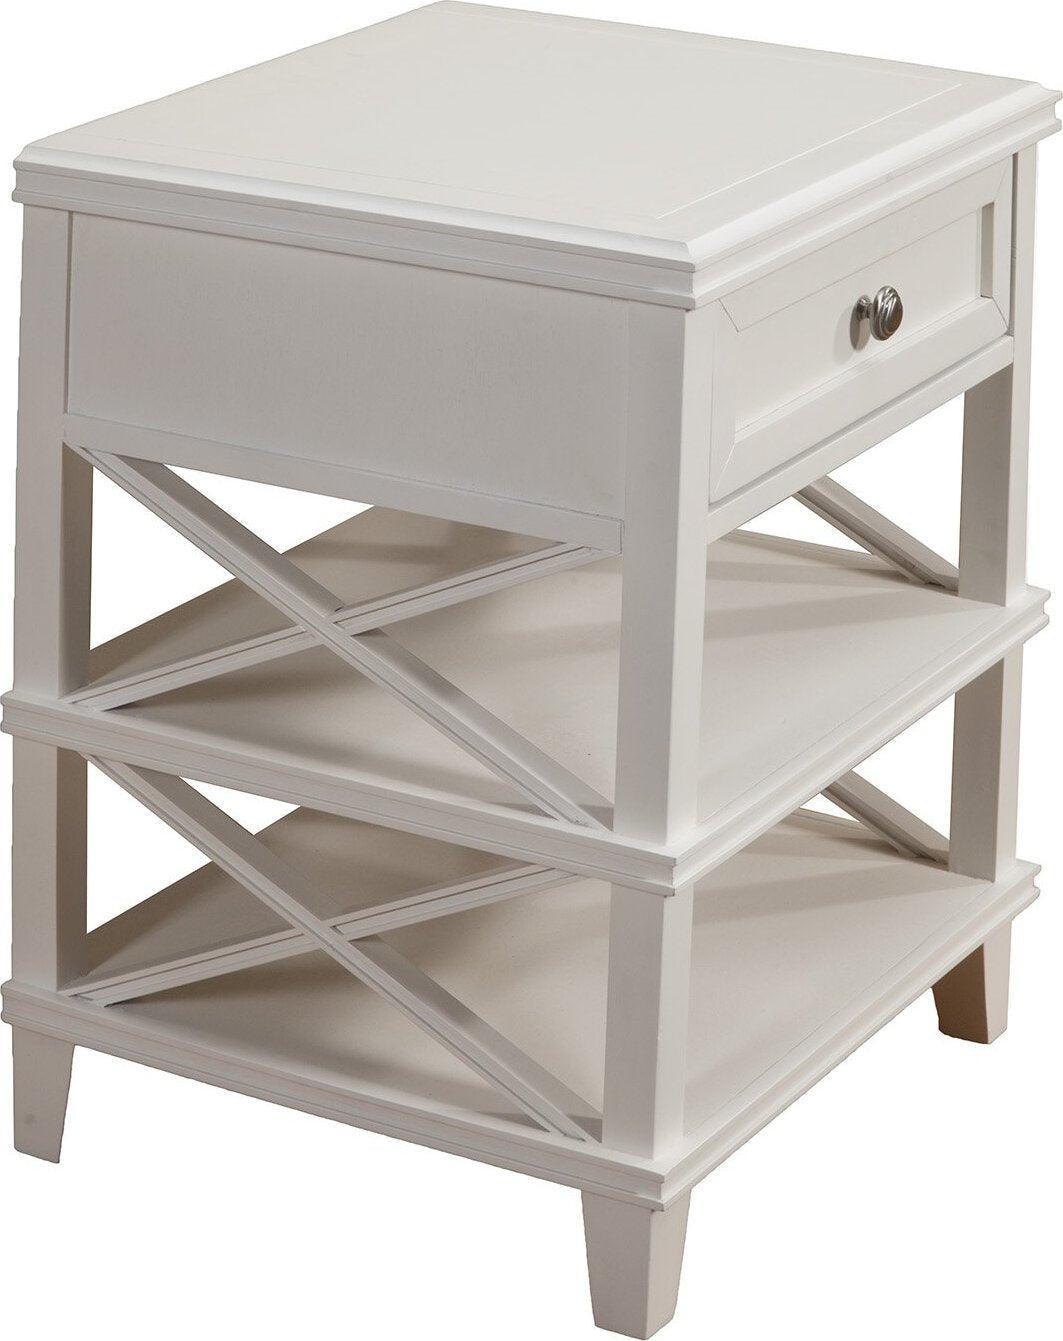 Alpine Furniture Nightstands & Side Tables - Potter 1 Drawer Nightstand w/Shelves White